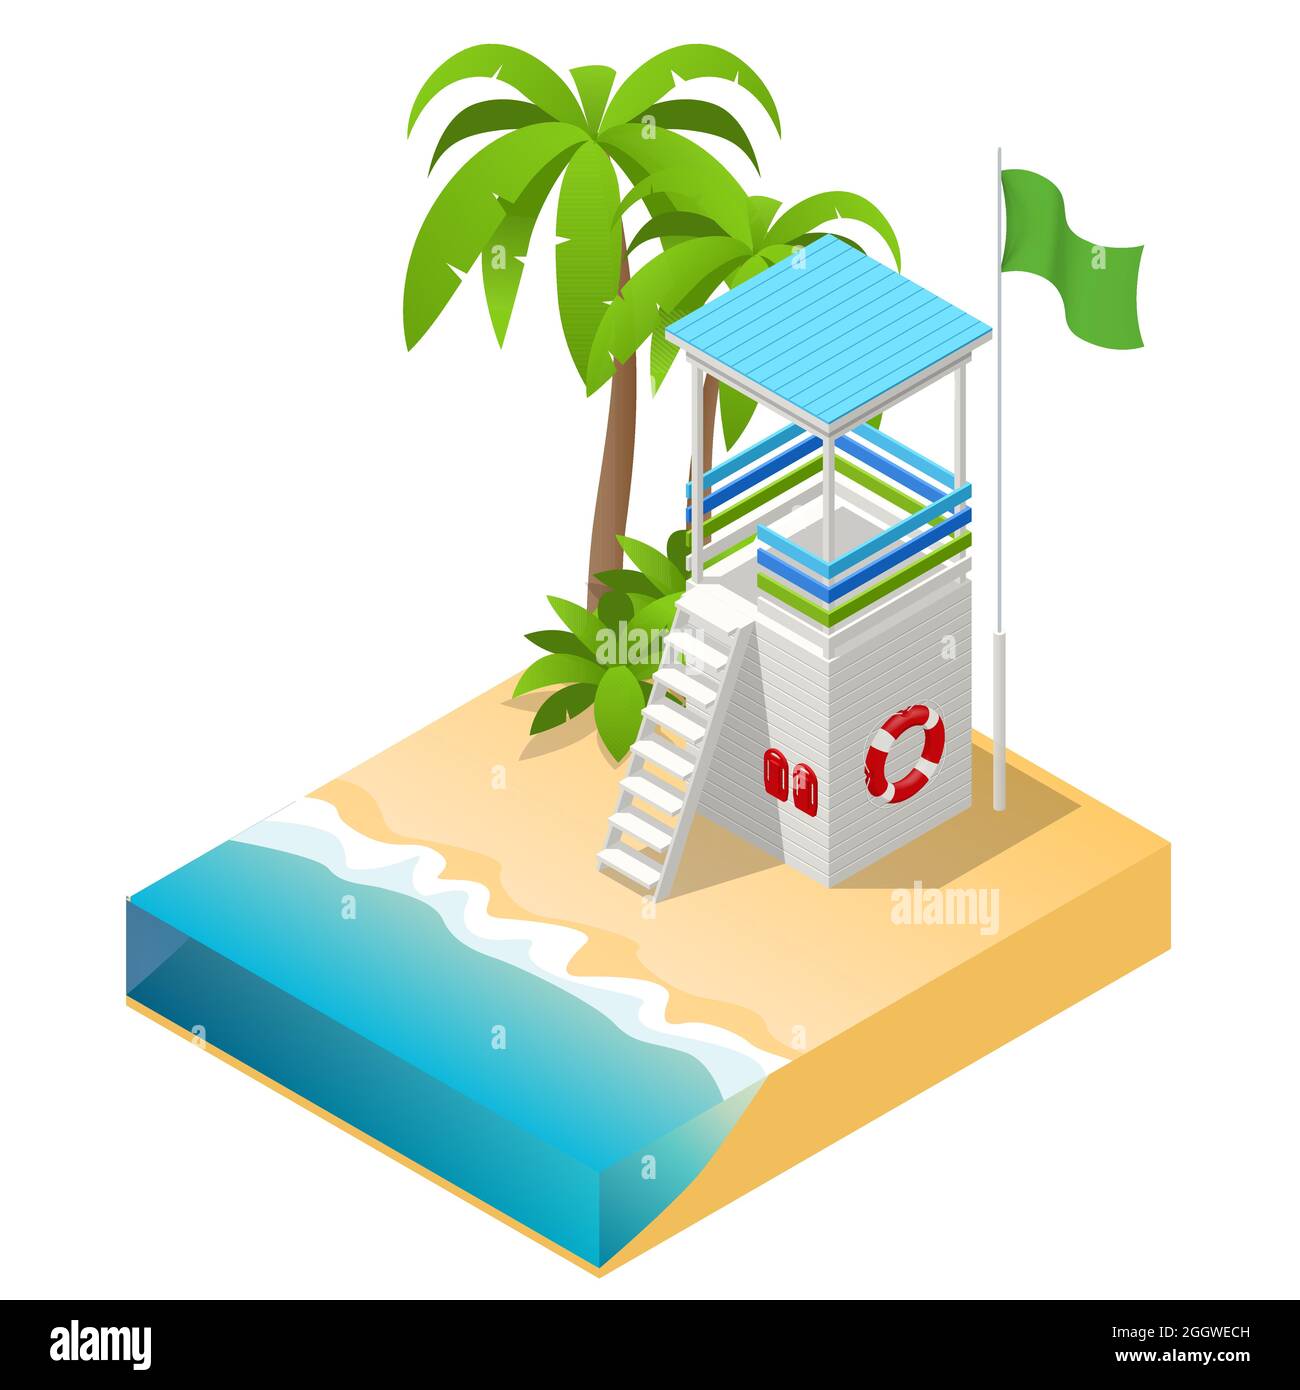 Isometric Watchtower on a Sandy Beach. Lifeguard on the beach. Safety while swimming. Stock Vector